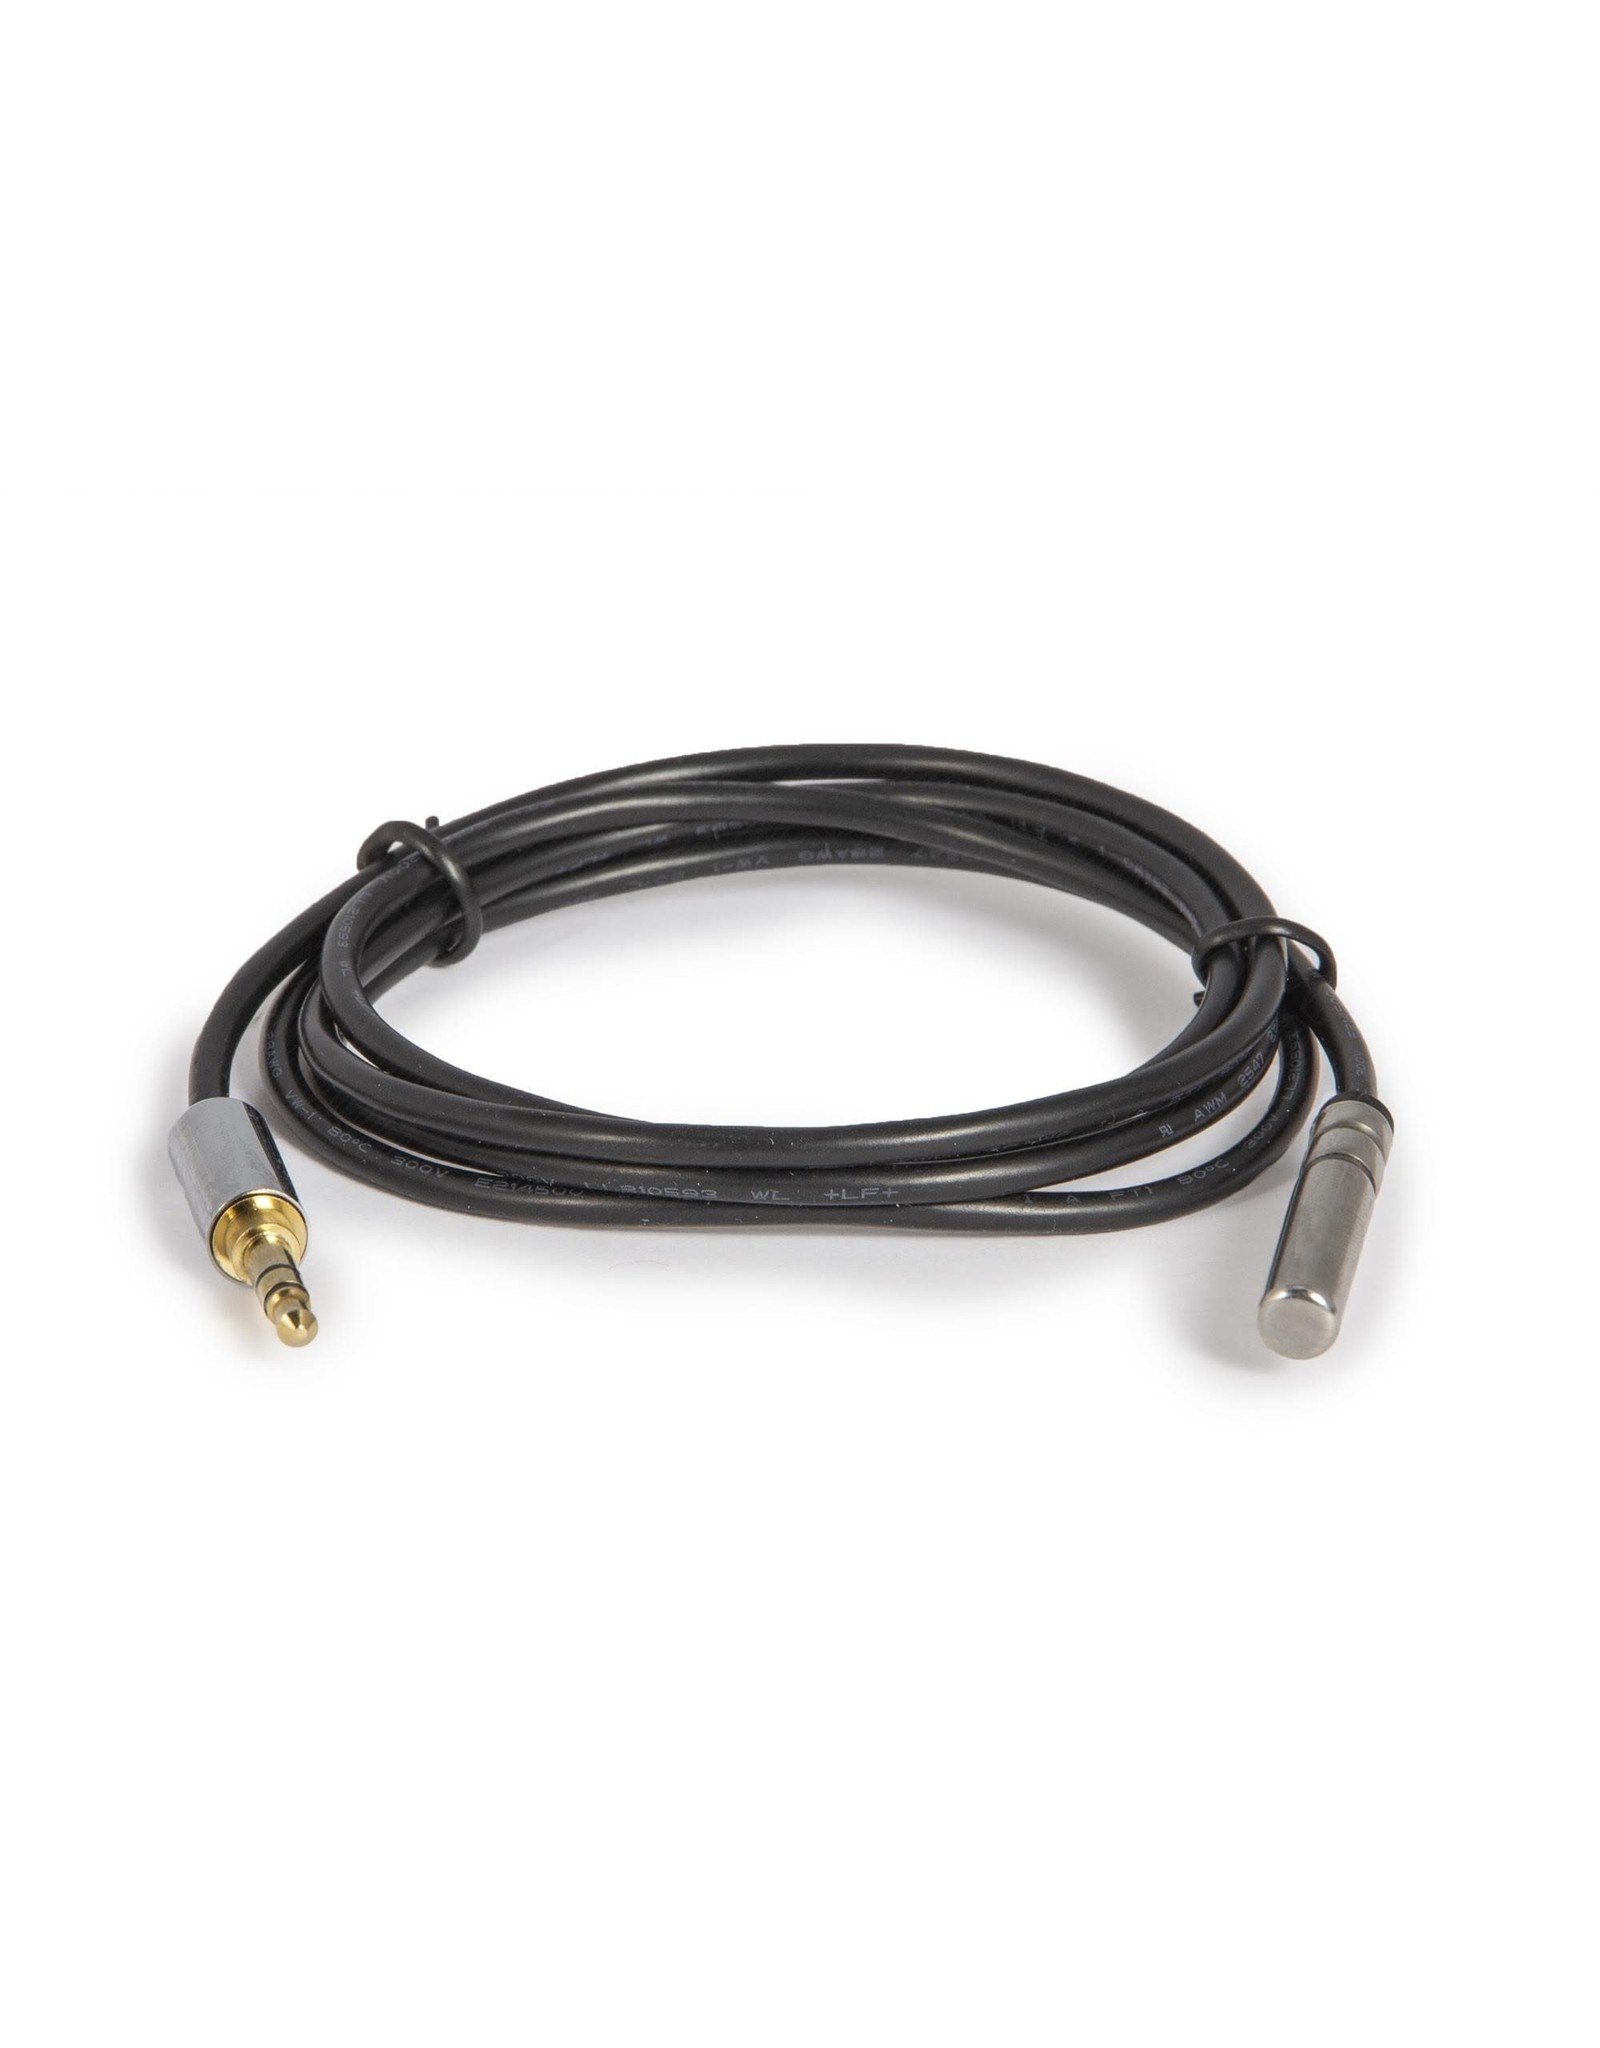 Baader Planetarium Baader Temperature Sensor for Steeldrive II with Cable